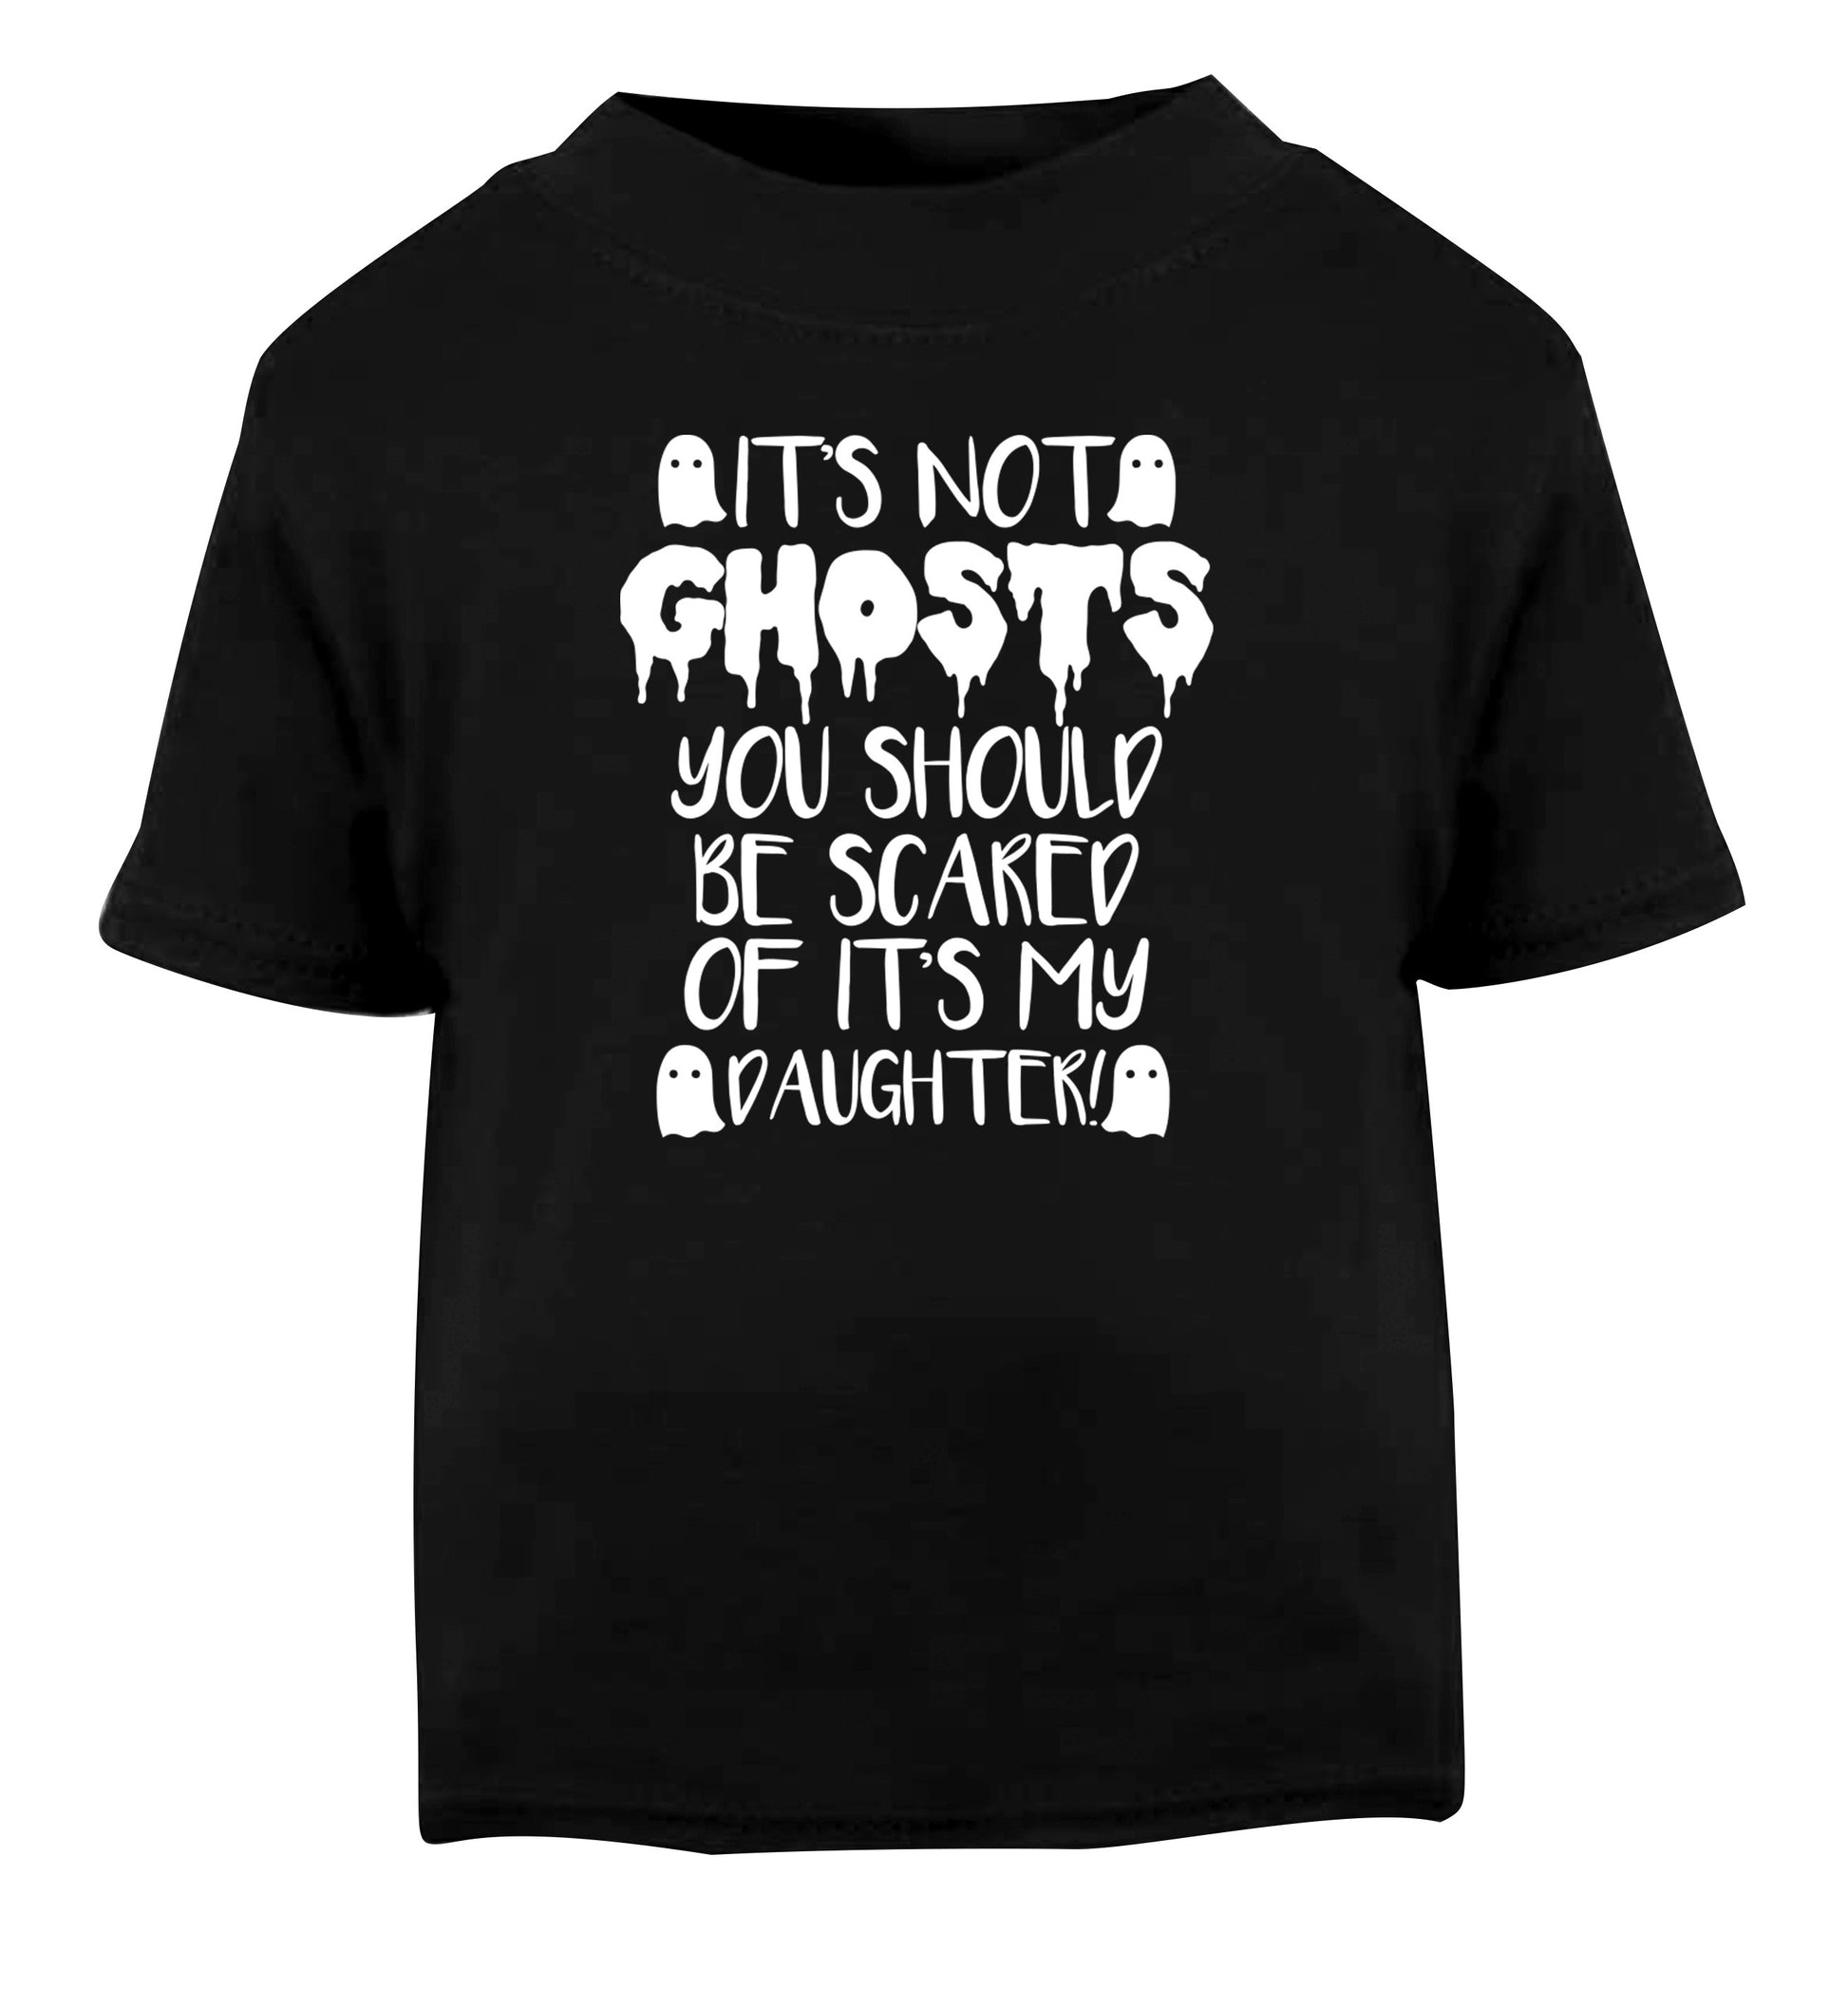 It's not ghosts you should be scared of it's my daughter! Black Baby Toddler Tshirt 2 years